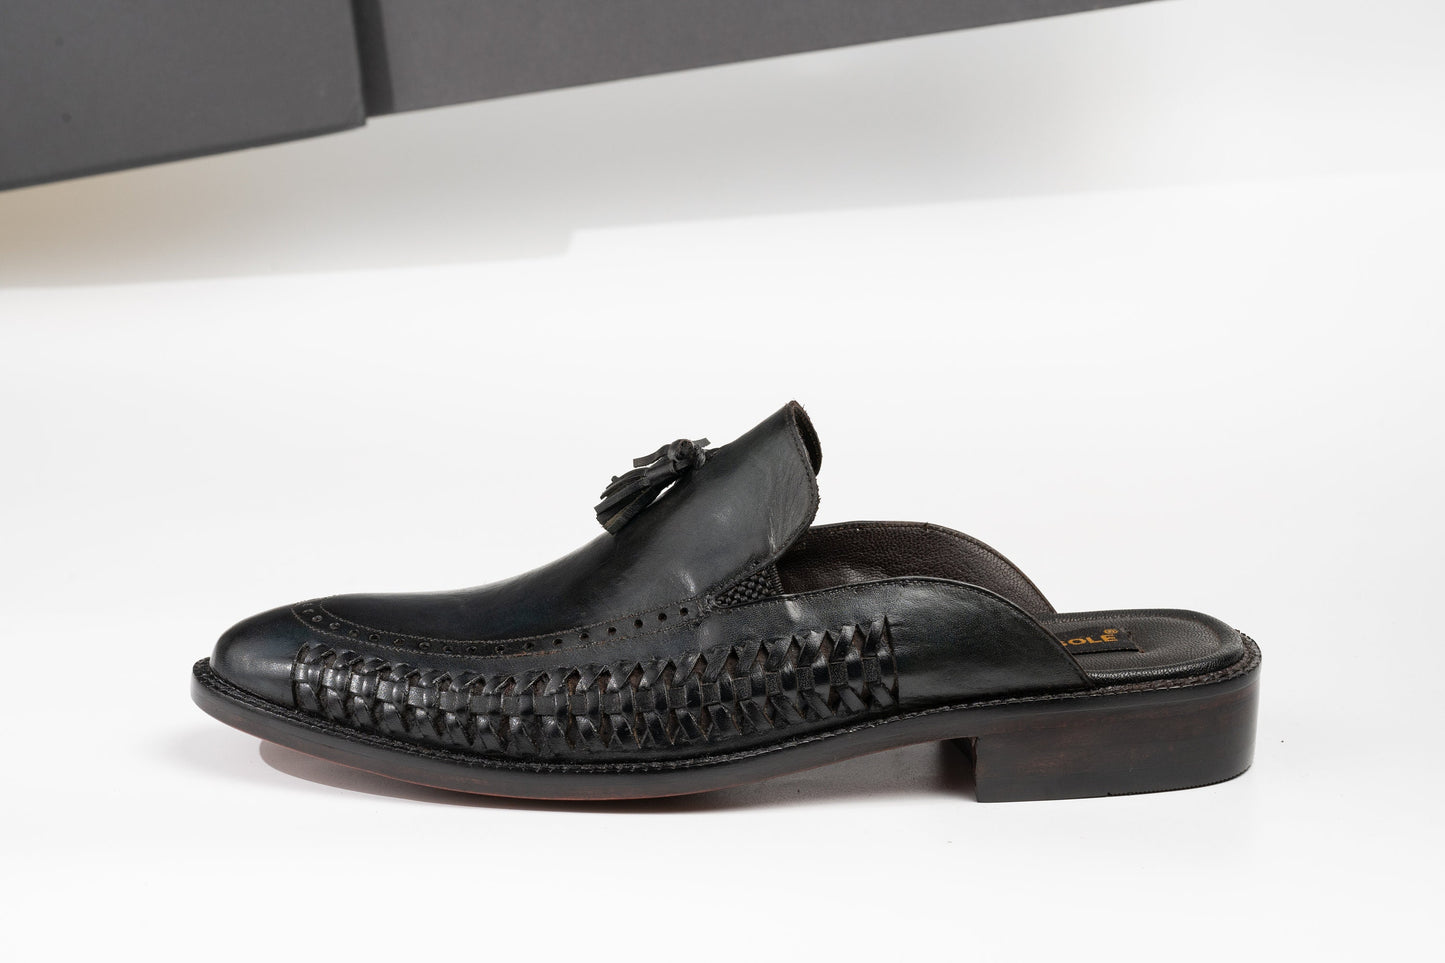 Black or any Color of Your Choice Whole Cut hand weave loafer Backless Slip On Mule Cow Crust Leather Custom Made-To-Order Shoes Woozy Store